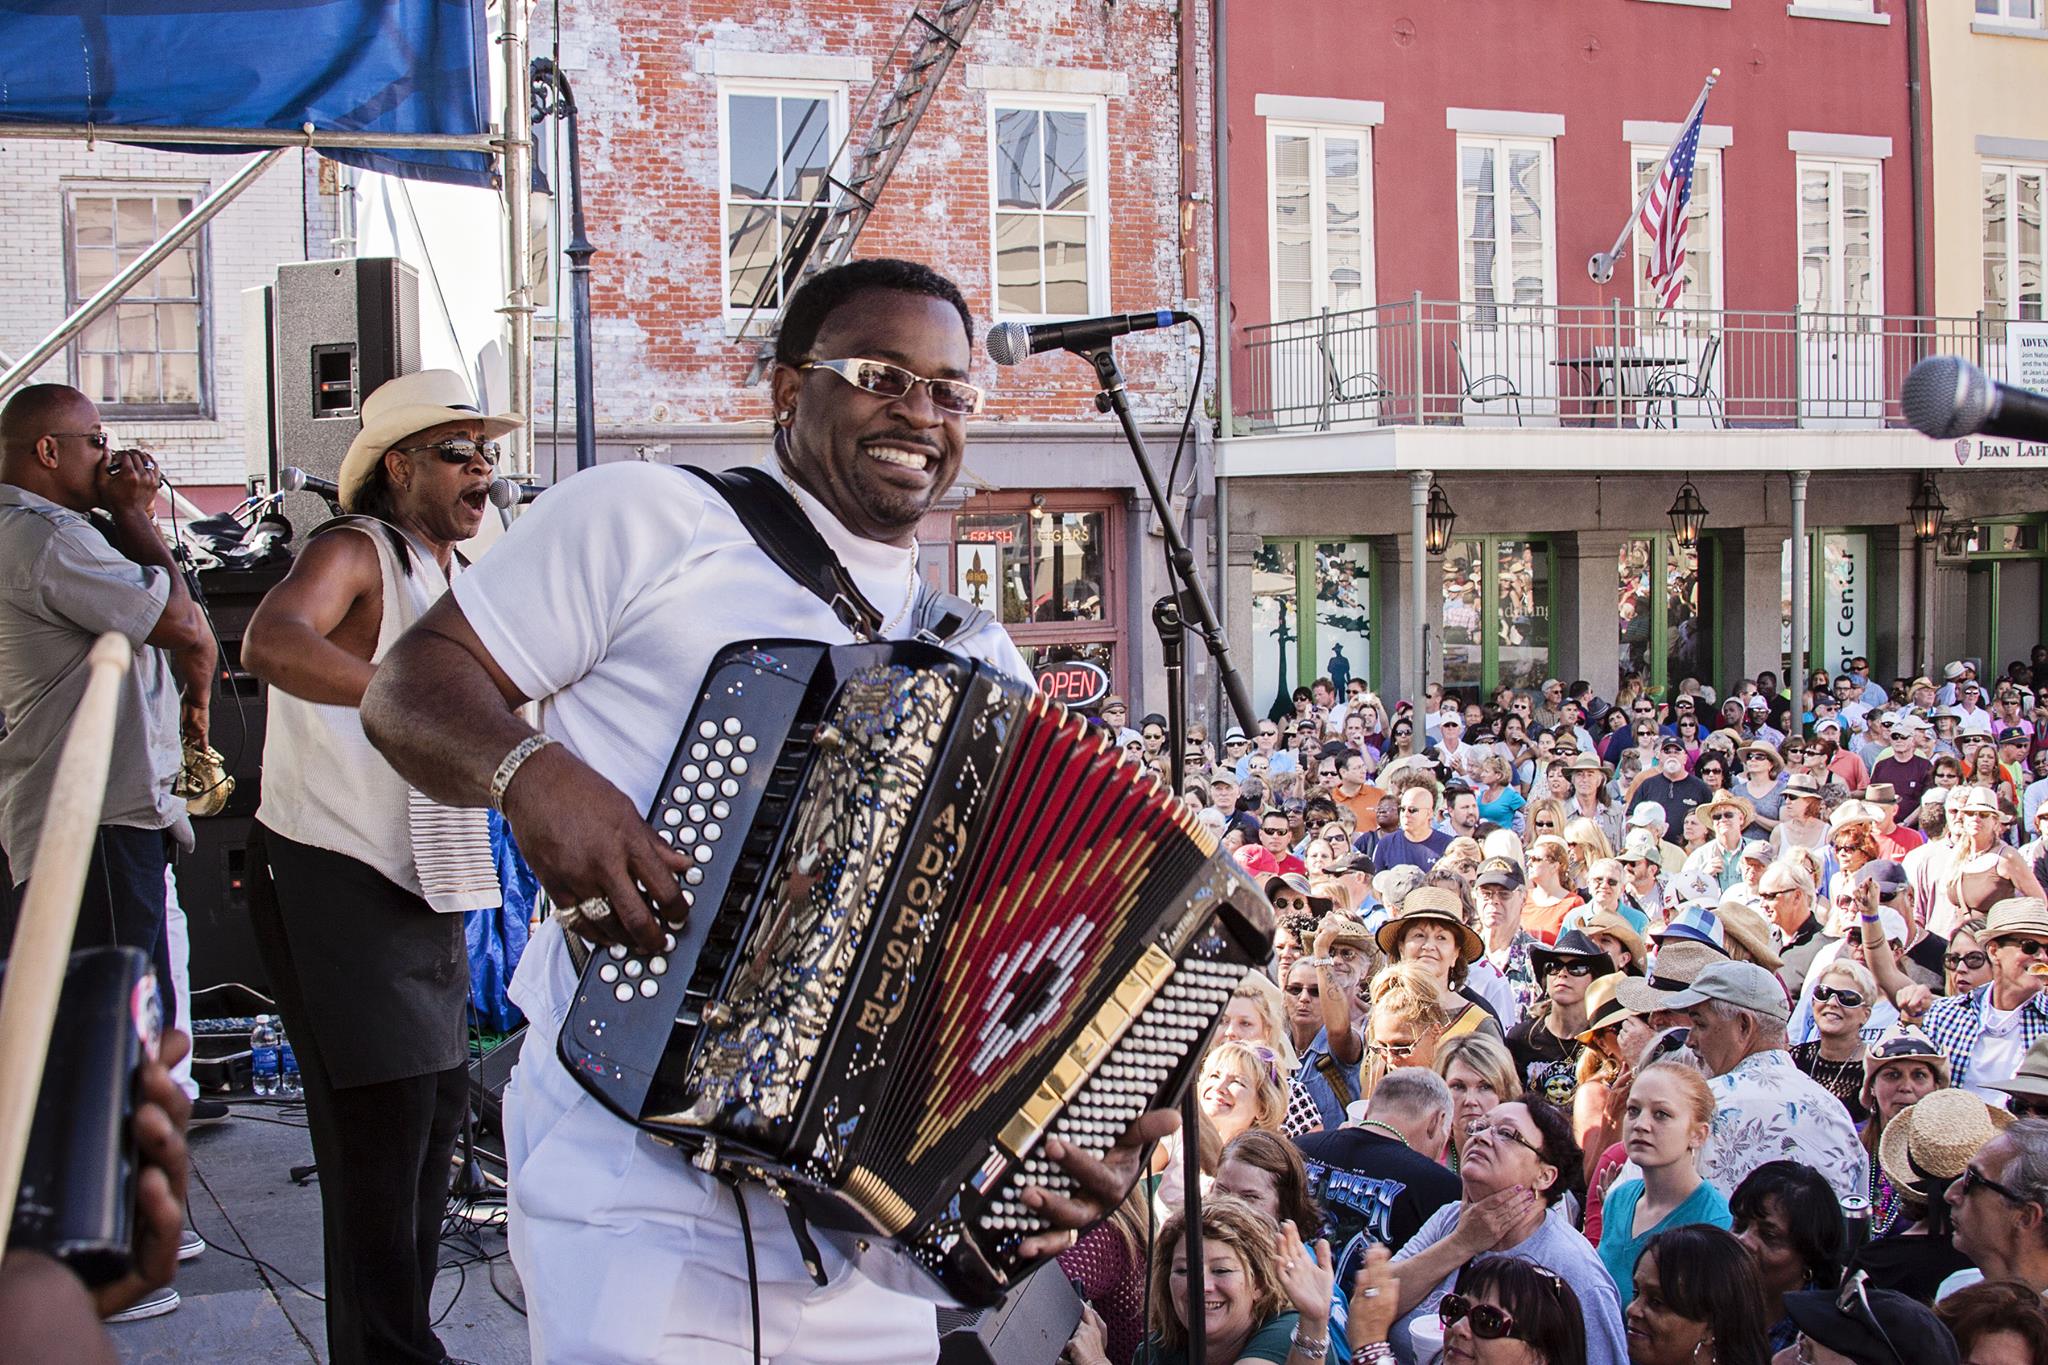 French Quarter Festival 2020 in New Orleans, LA | Everfest